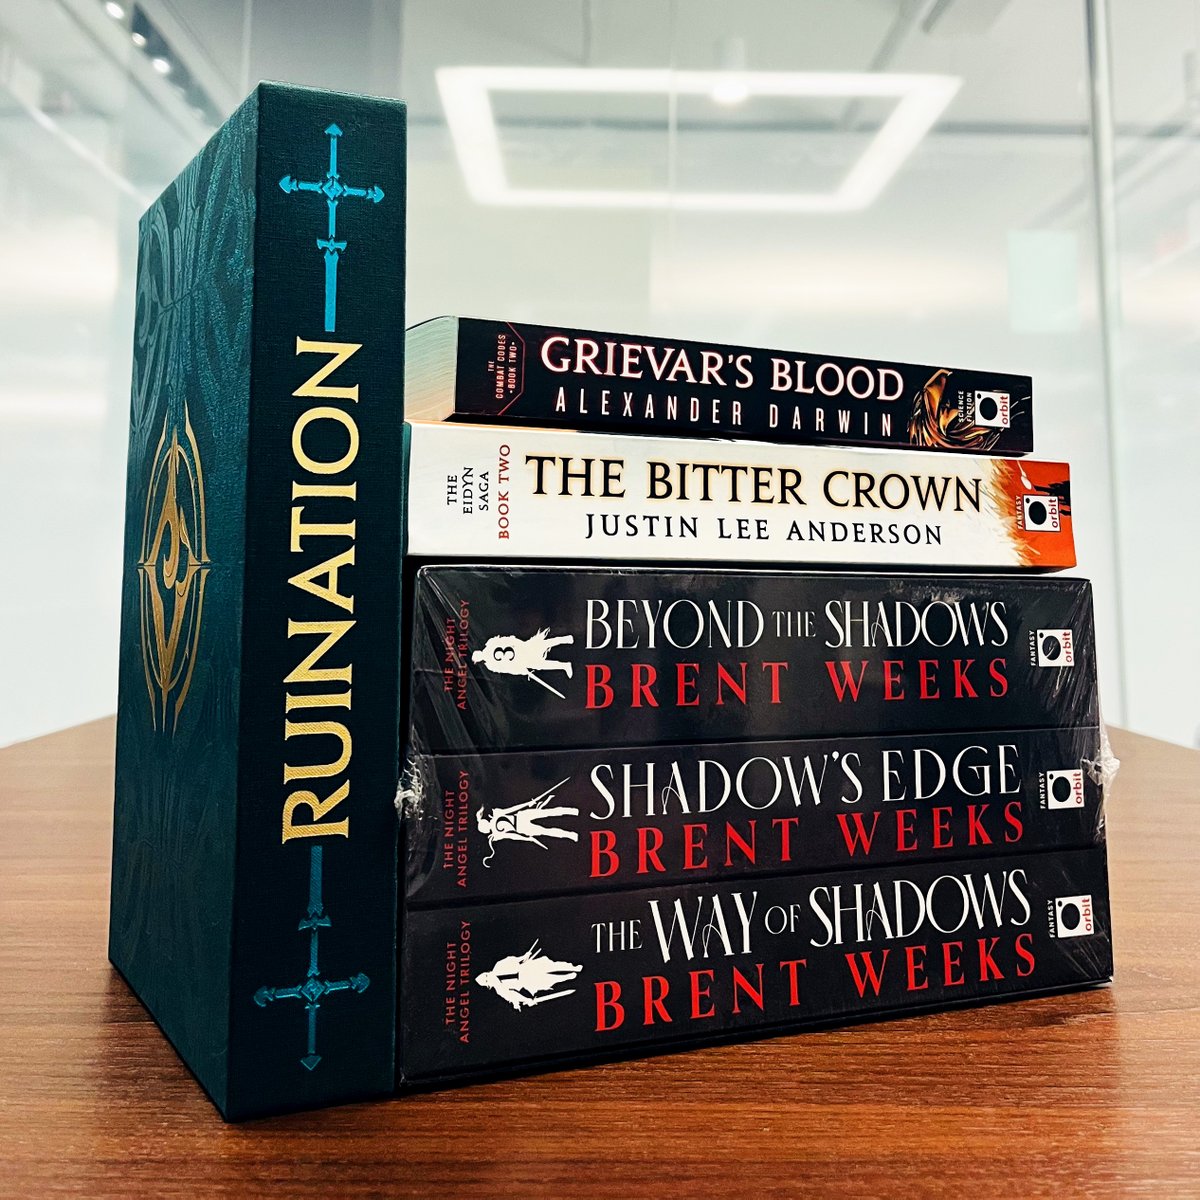 What's coming soon from Orbit? Read what's next from our #Orbit23 New Voices with two sequels by @combatcodes and @authorjla. Grab a boxset of the Night Angel trilogy by @BrentWeeks. Or, snag the perfect gift with our collector's edition of RUINATION!